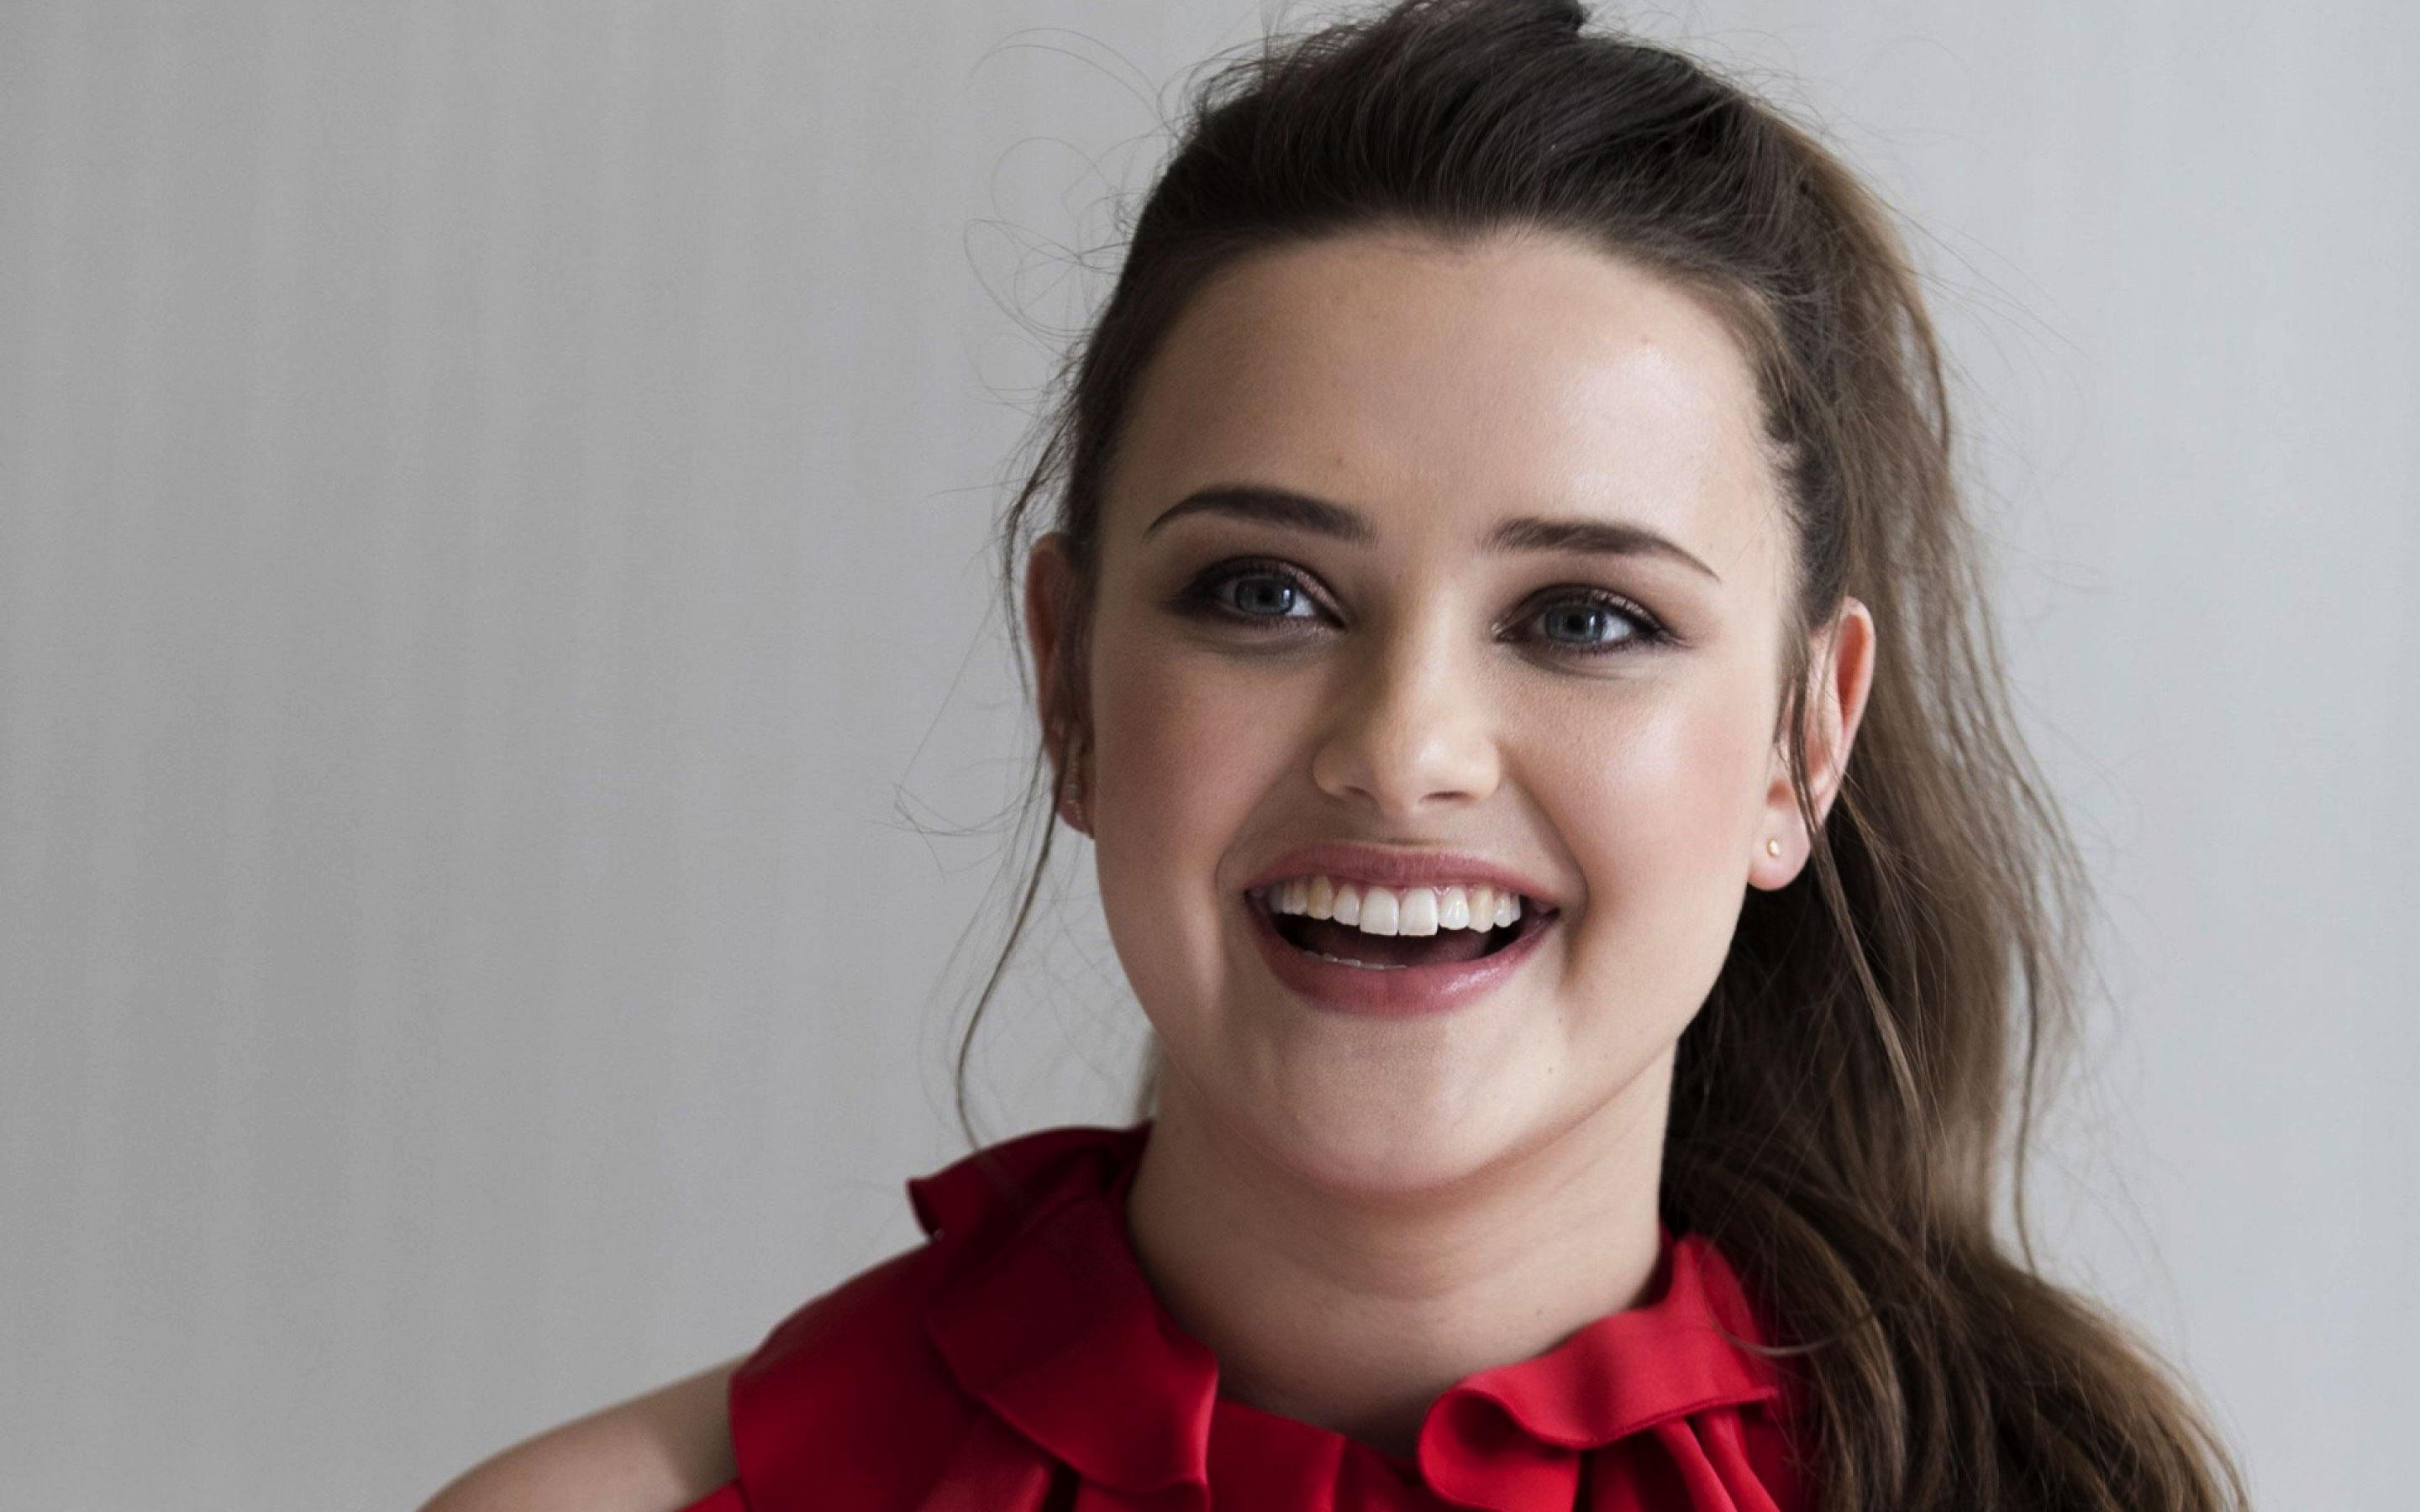 Katherine Langford Is Not In 13 Reasons Why Season 3 But Her